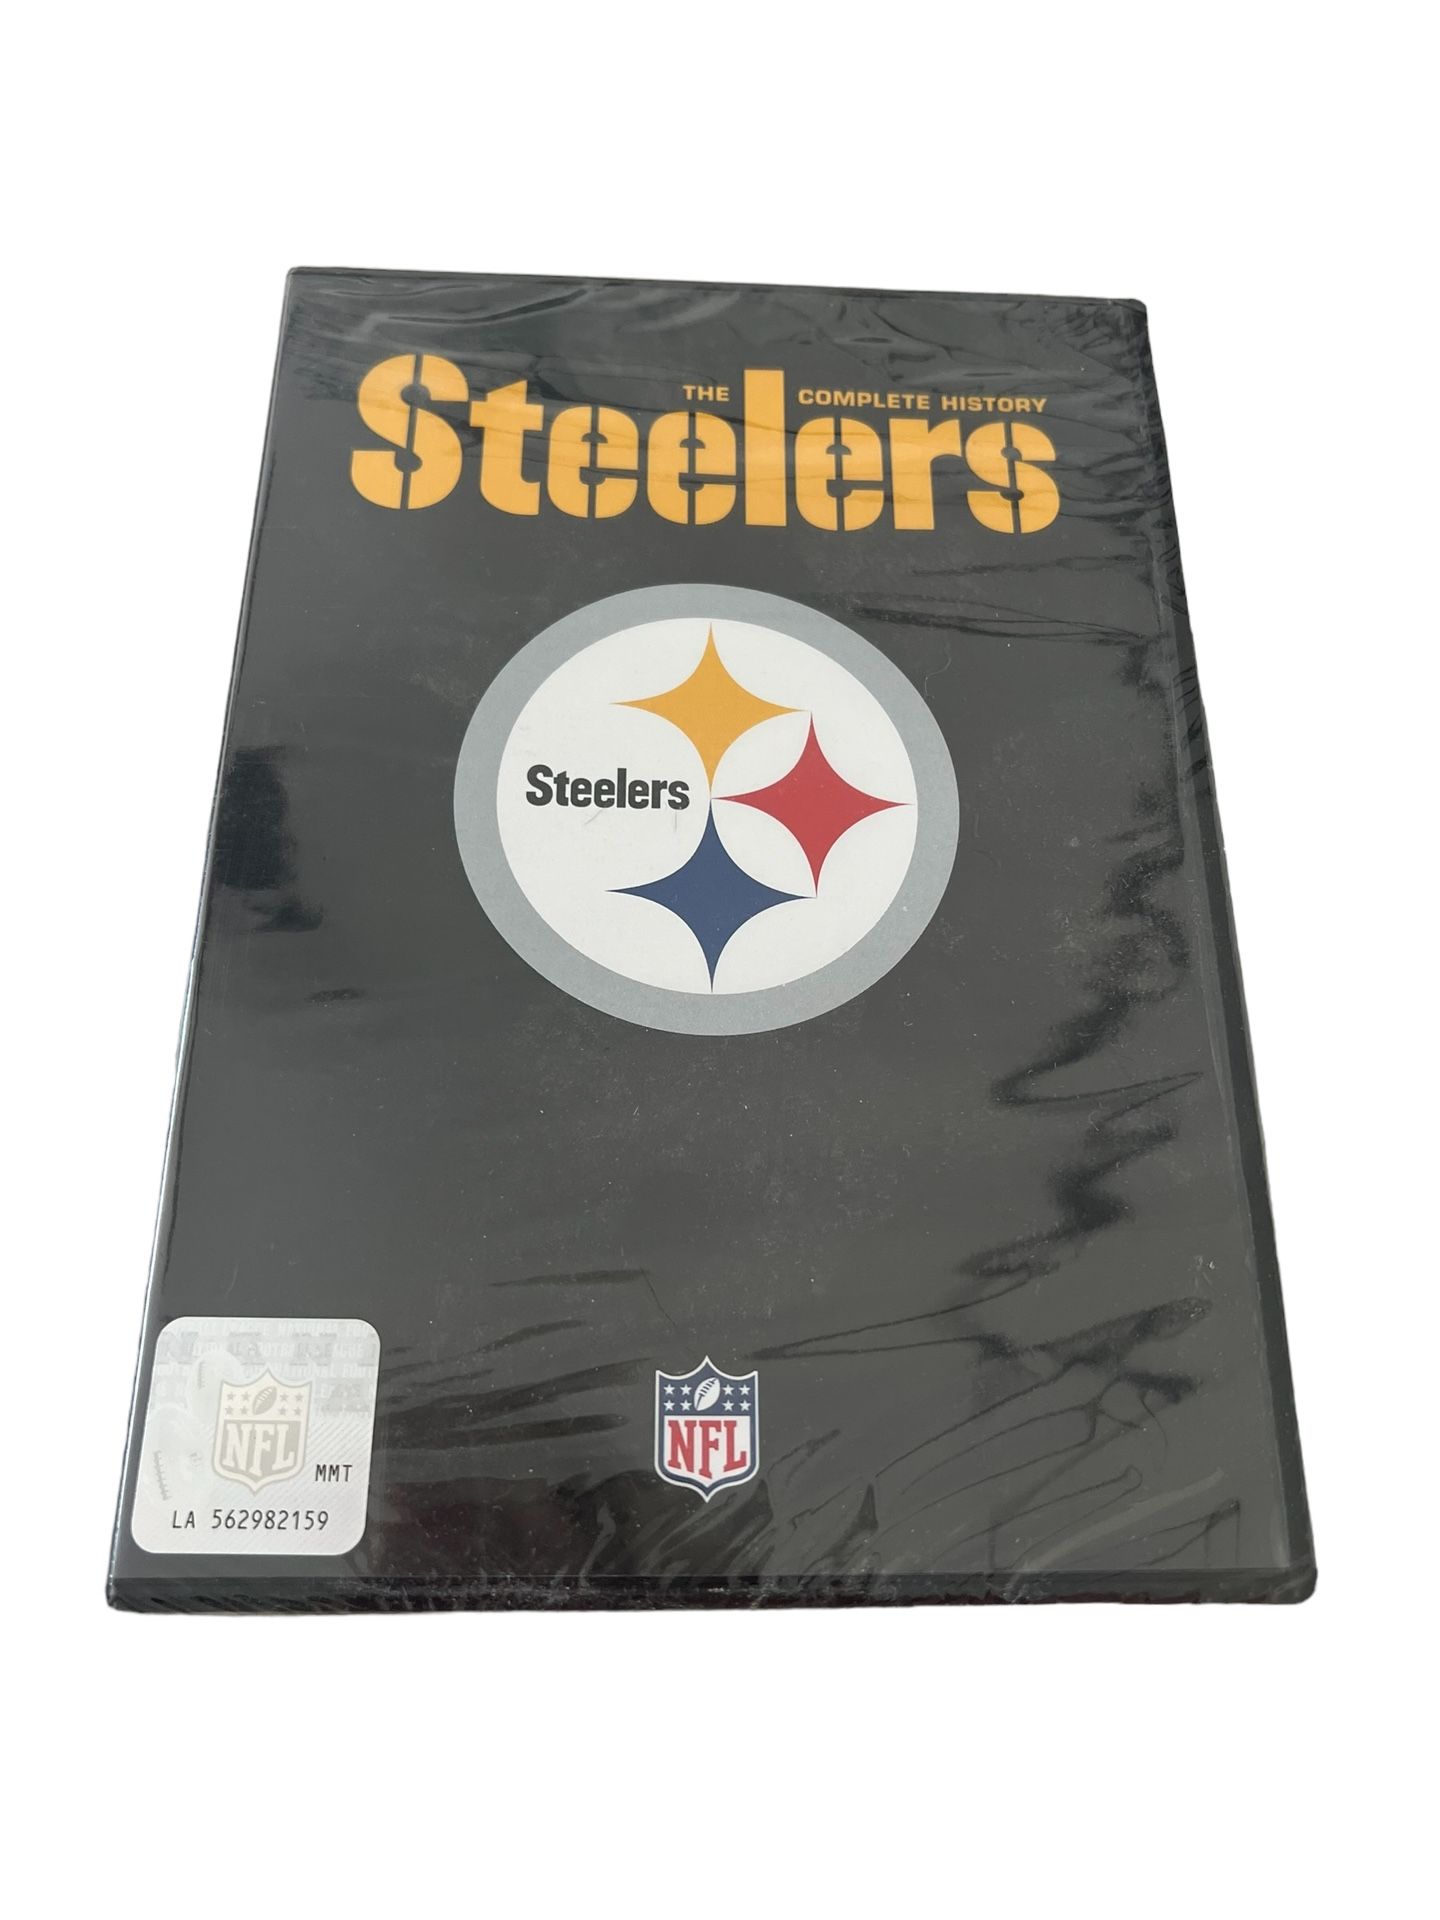 The Complete History of the Pittsburgh Steelers (DVD)  The Complete History of the Pittsburgh Steelers (DVD) Get ready to dive deep into the rich hist